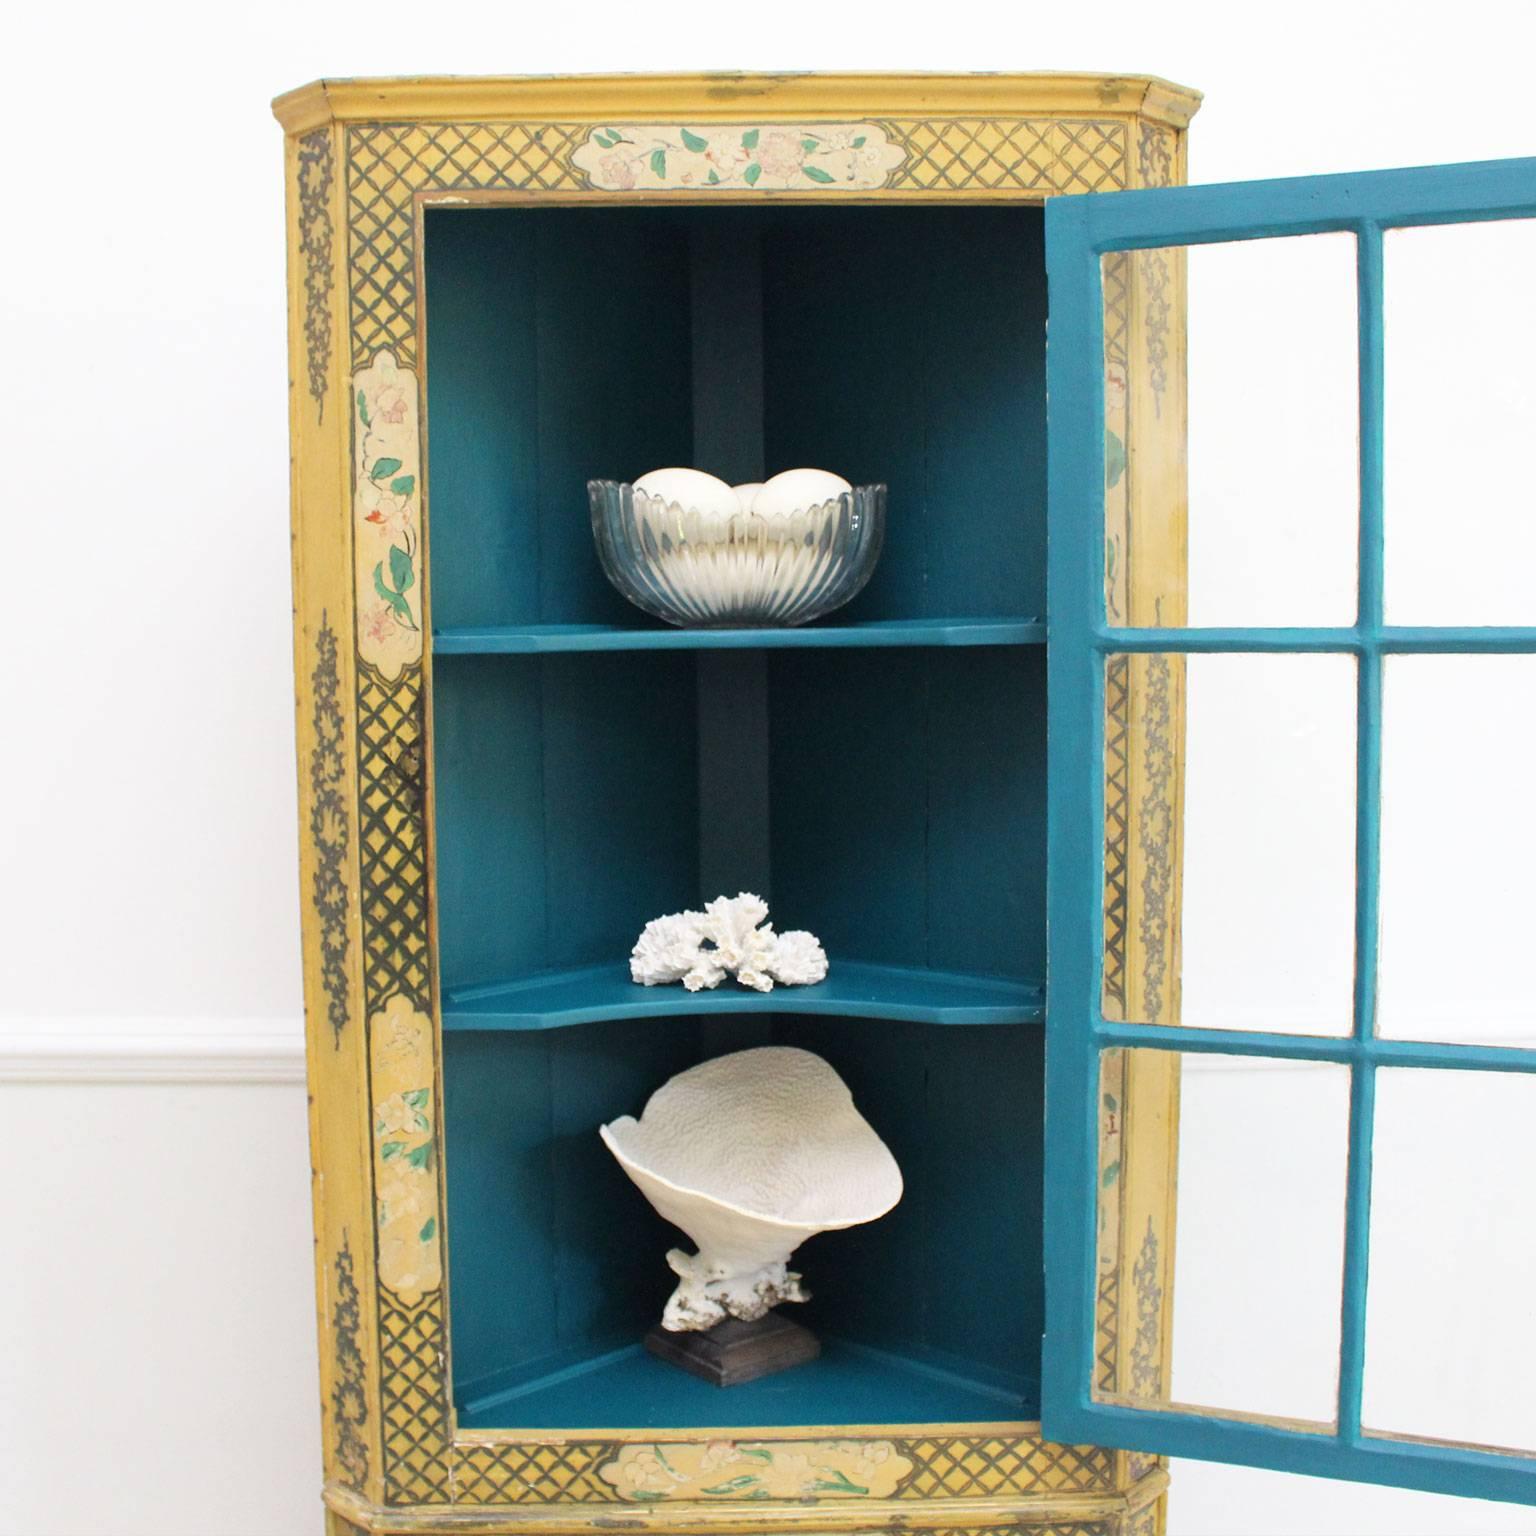 What a beautiful Chinoiserie cupboard this is. We have left it in it's country house condition as we feel it has so much character. We love the beautiful decoration on the yellow background. The interior has been recently painted in a dark teal